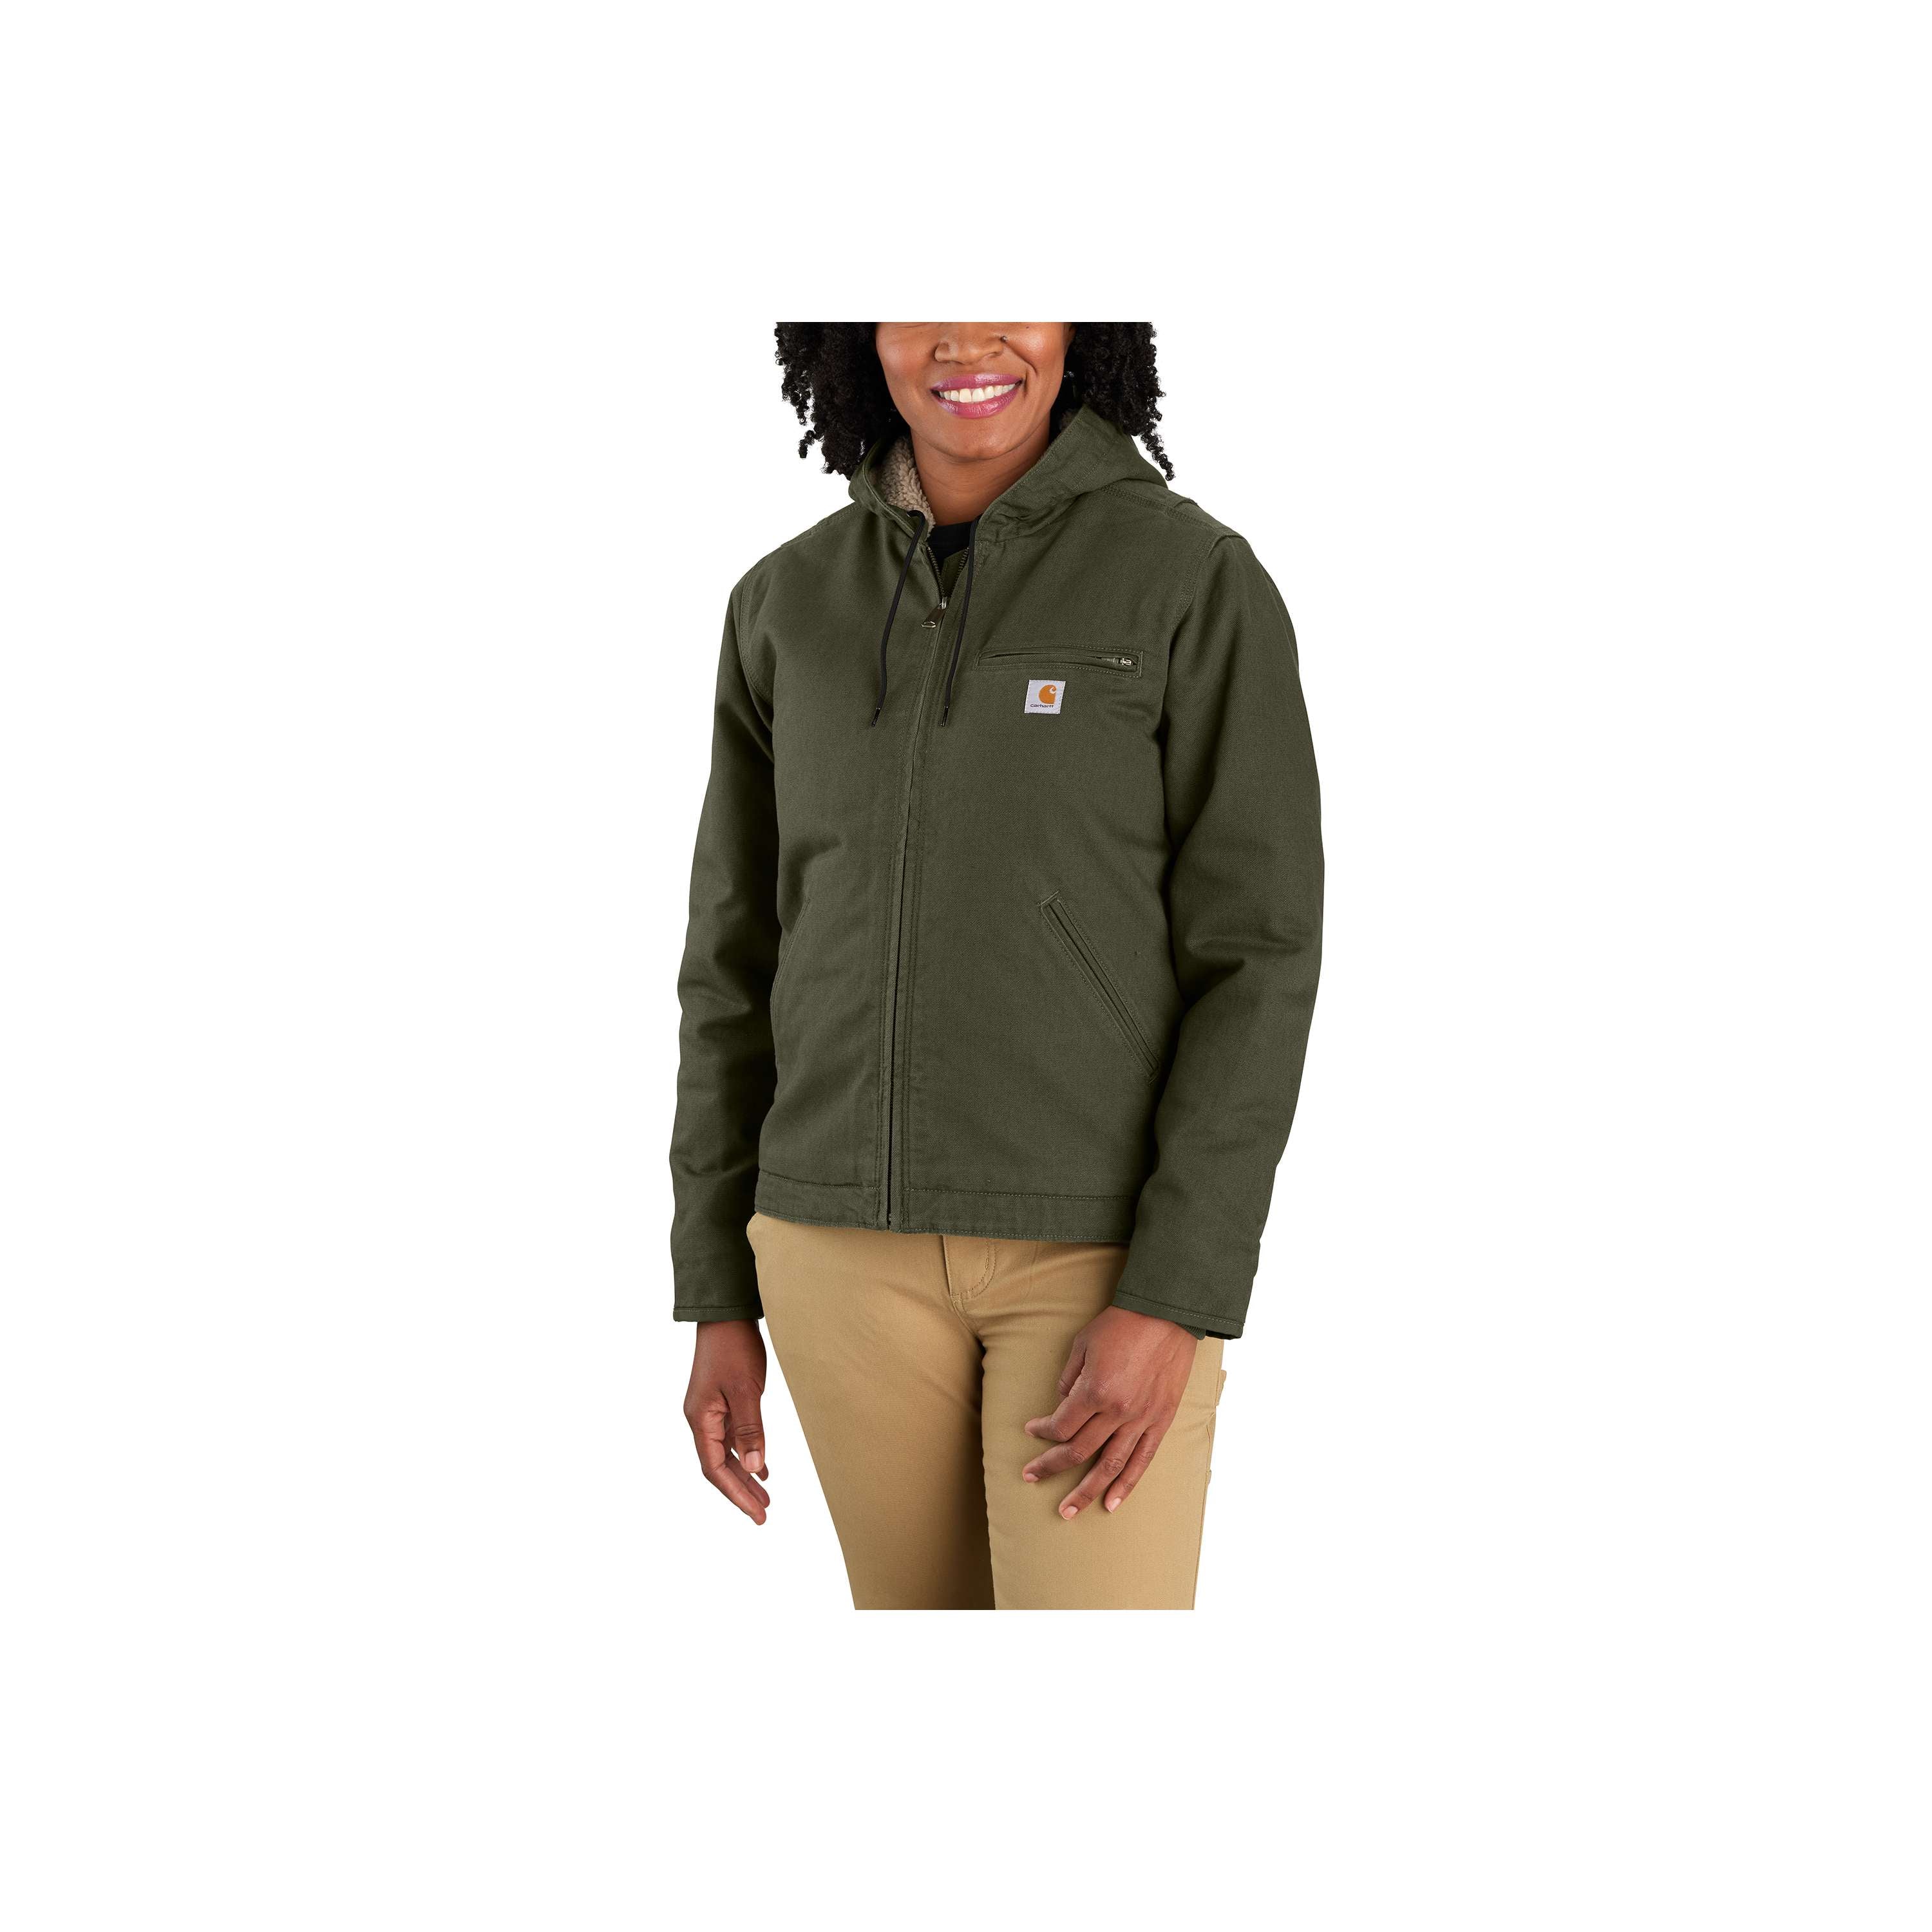 104292 - WOMEN'S LOOSE FIT WASHED DUCK SHERPA LINED JACKET - 3 WARMEST –  Marshlands Canada Factory Outlet